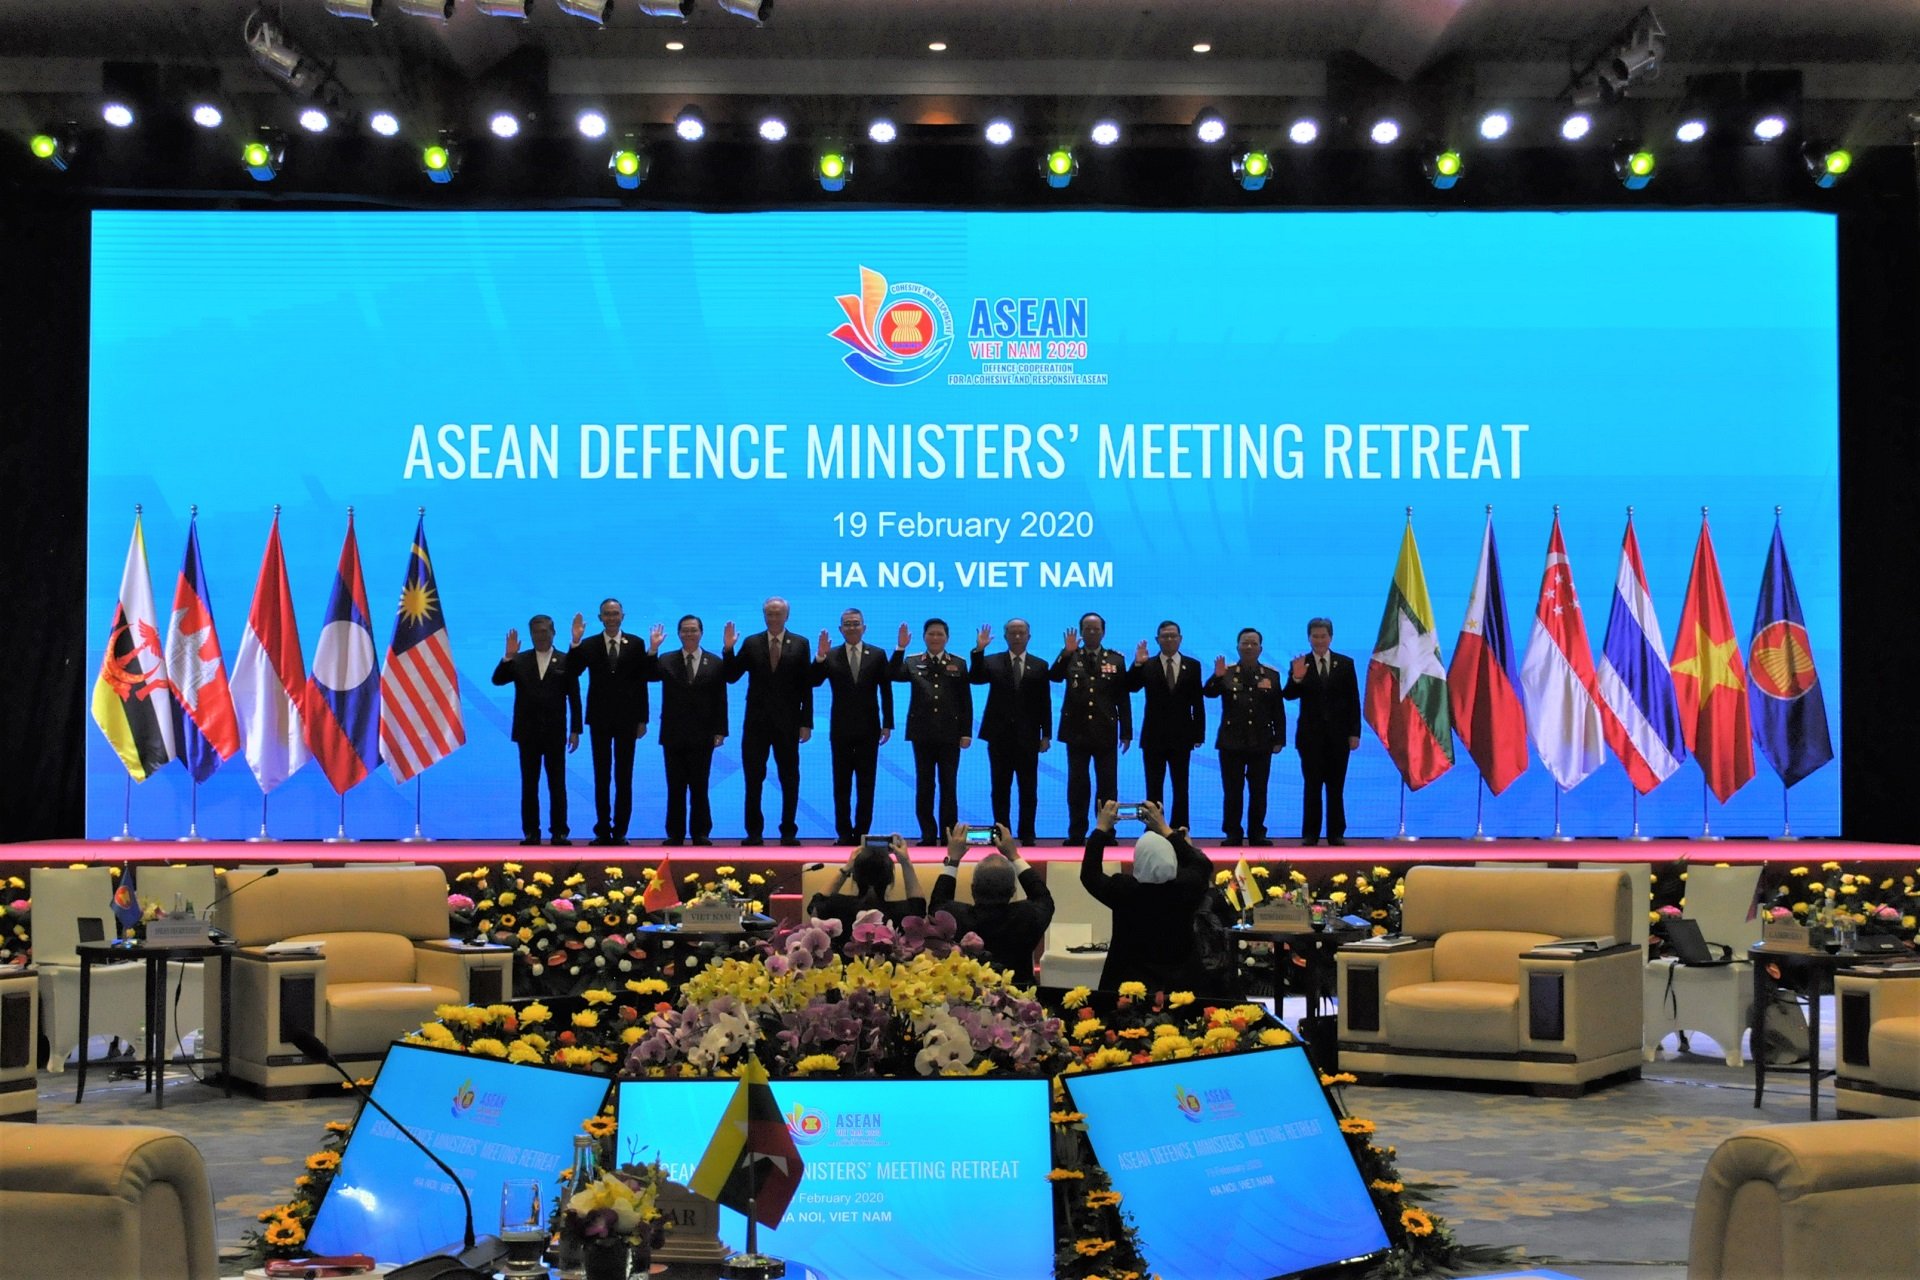 Minister for Defence Dr Ng Eng Hen (fourth from left) with the other ASEAN Defence representatives and the Secretary-General of ASEAN Dato Lim Jock Hoi giving the ASEAN wave at the ASEAN Defence Ministers' Meeting (ADMM) Retreat at Hanoi, Vietnam.